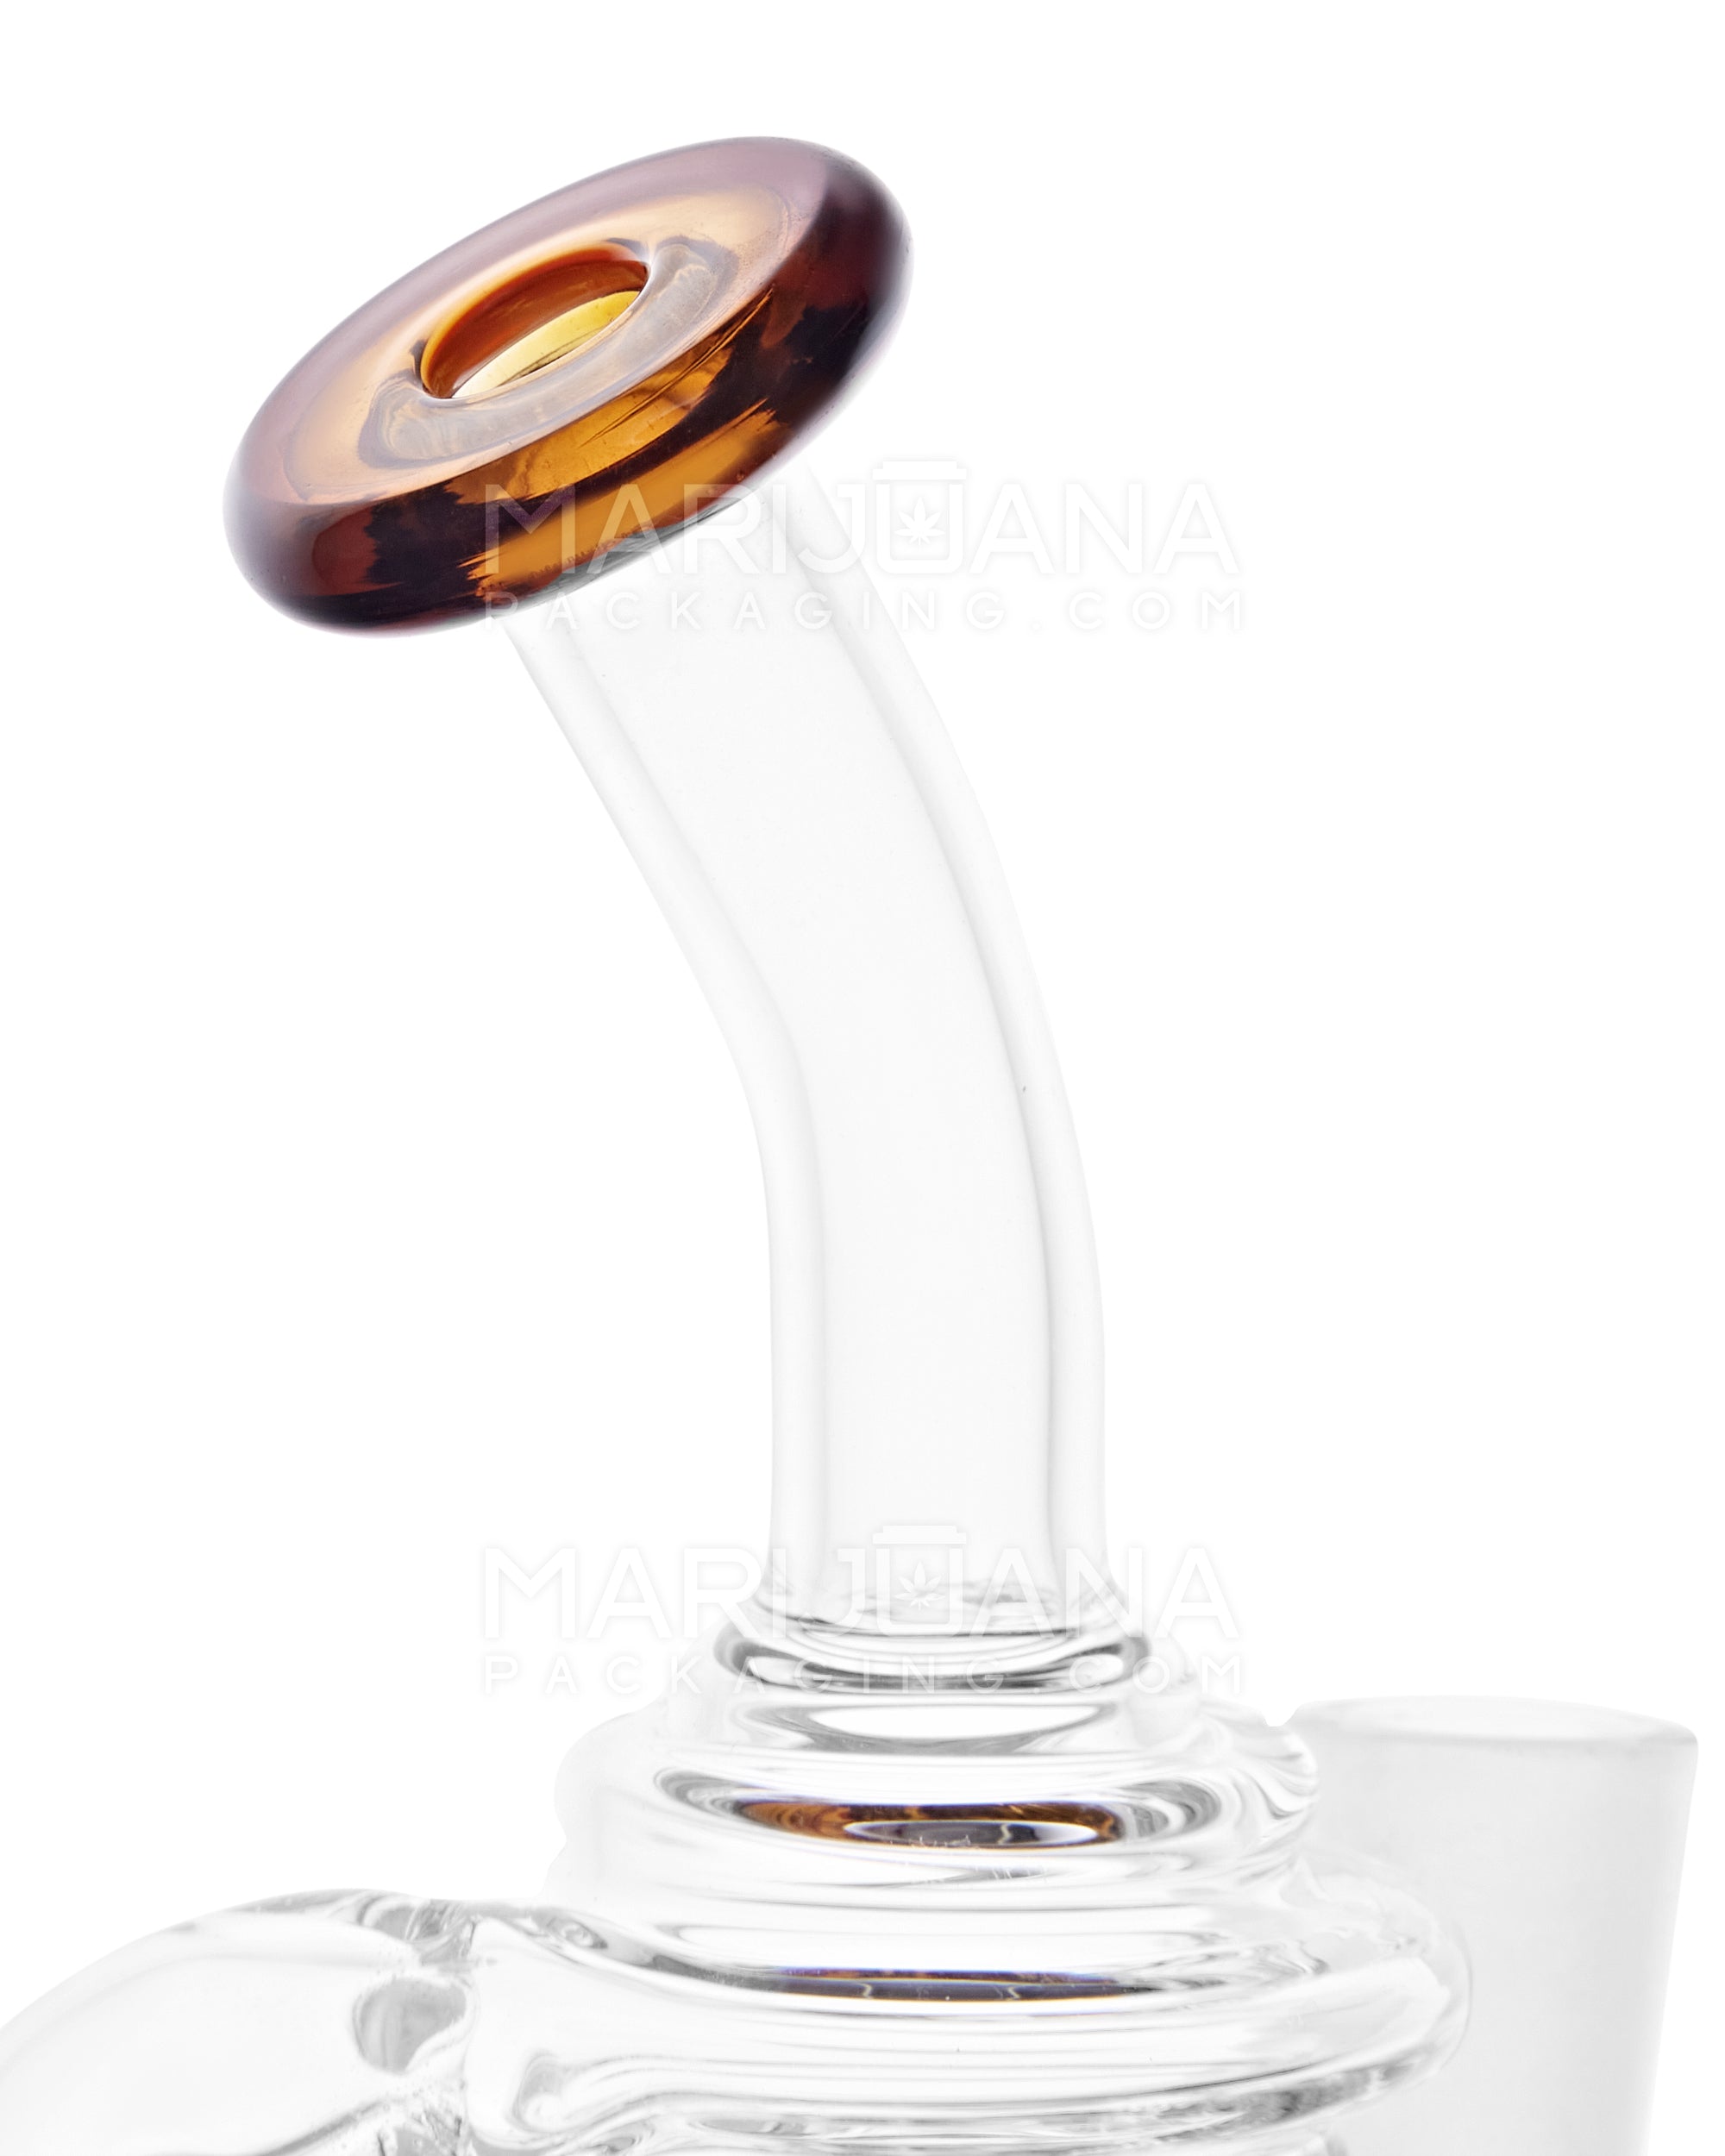 USA Glass | Bent Neck Single Uptake Mini Recycler Water Pipe w/ Orb Perc | 5.5in Tall - 10mm Bowl - Amber